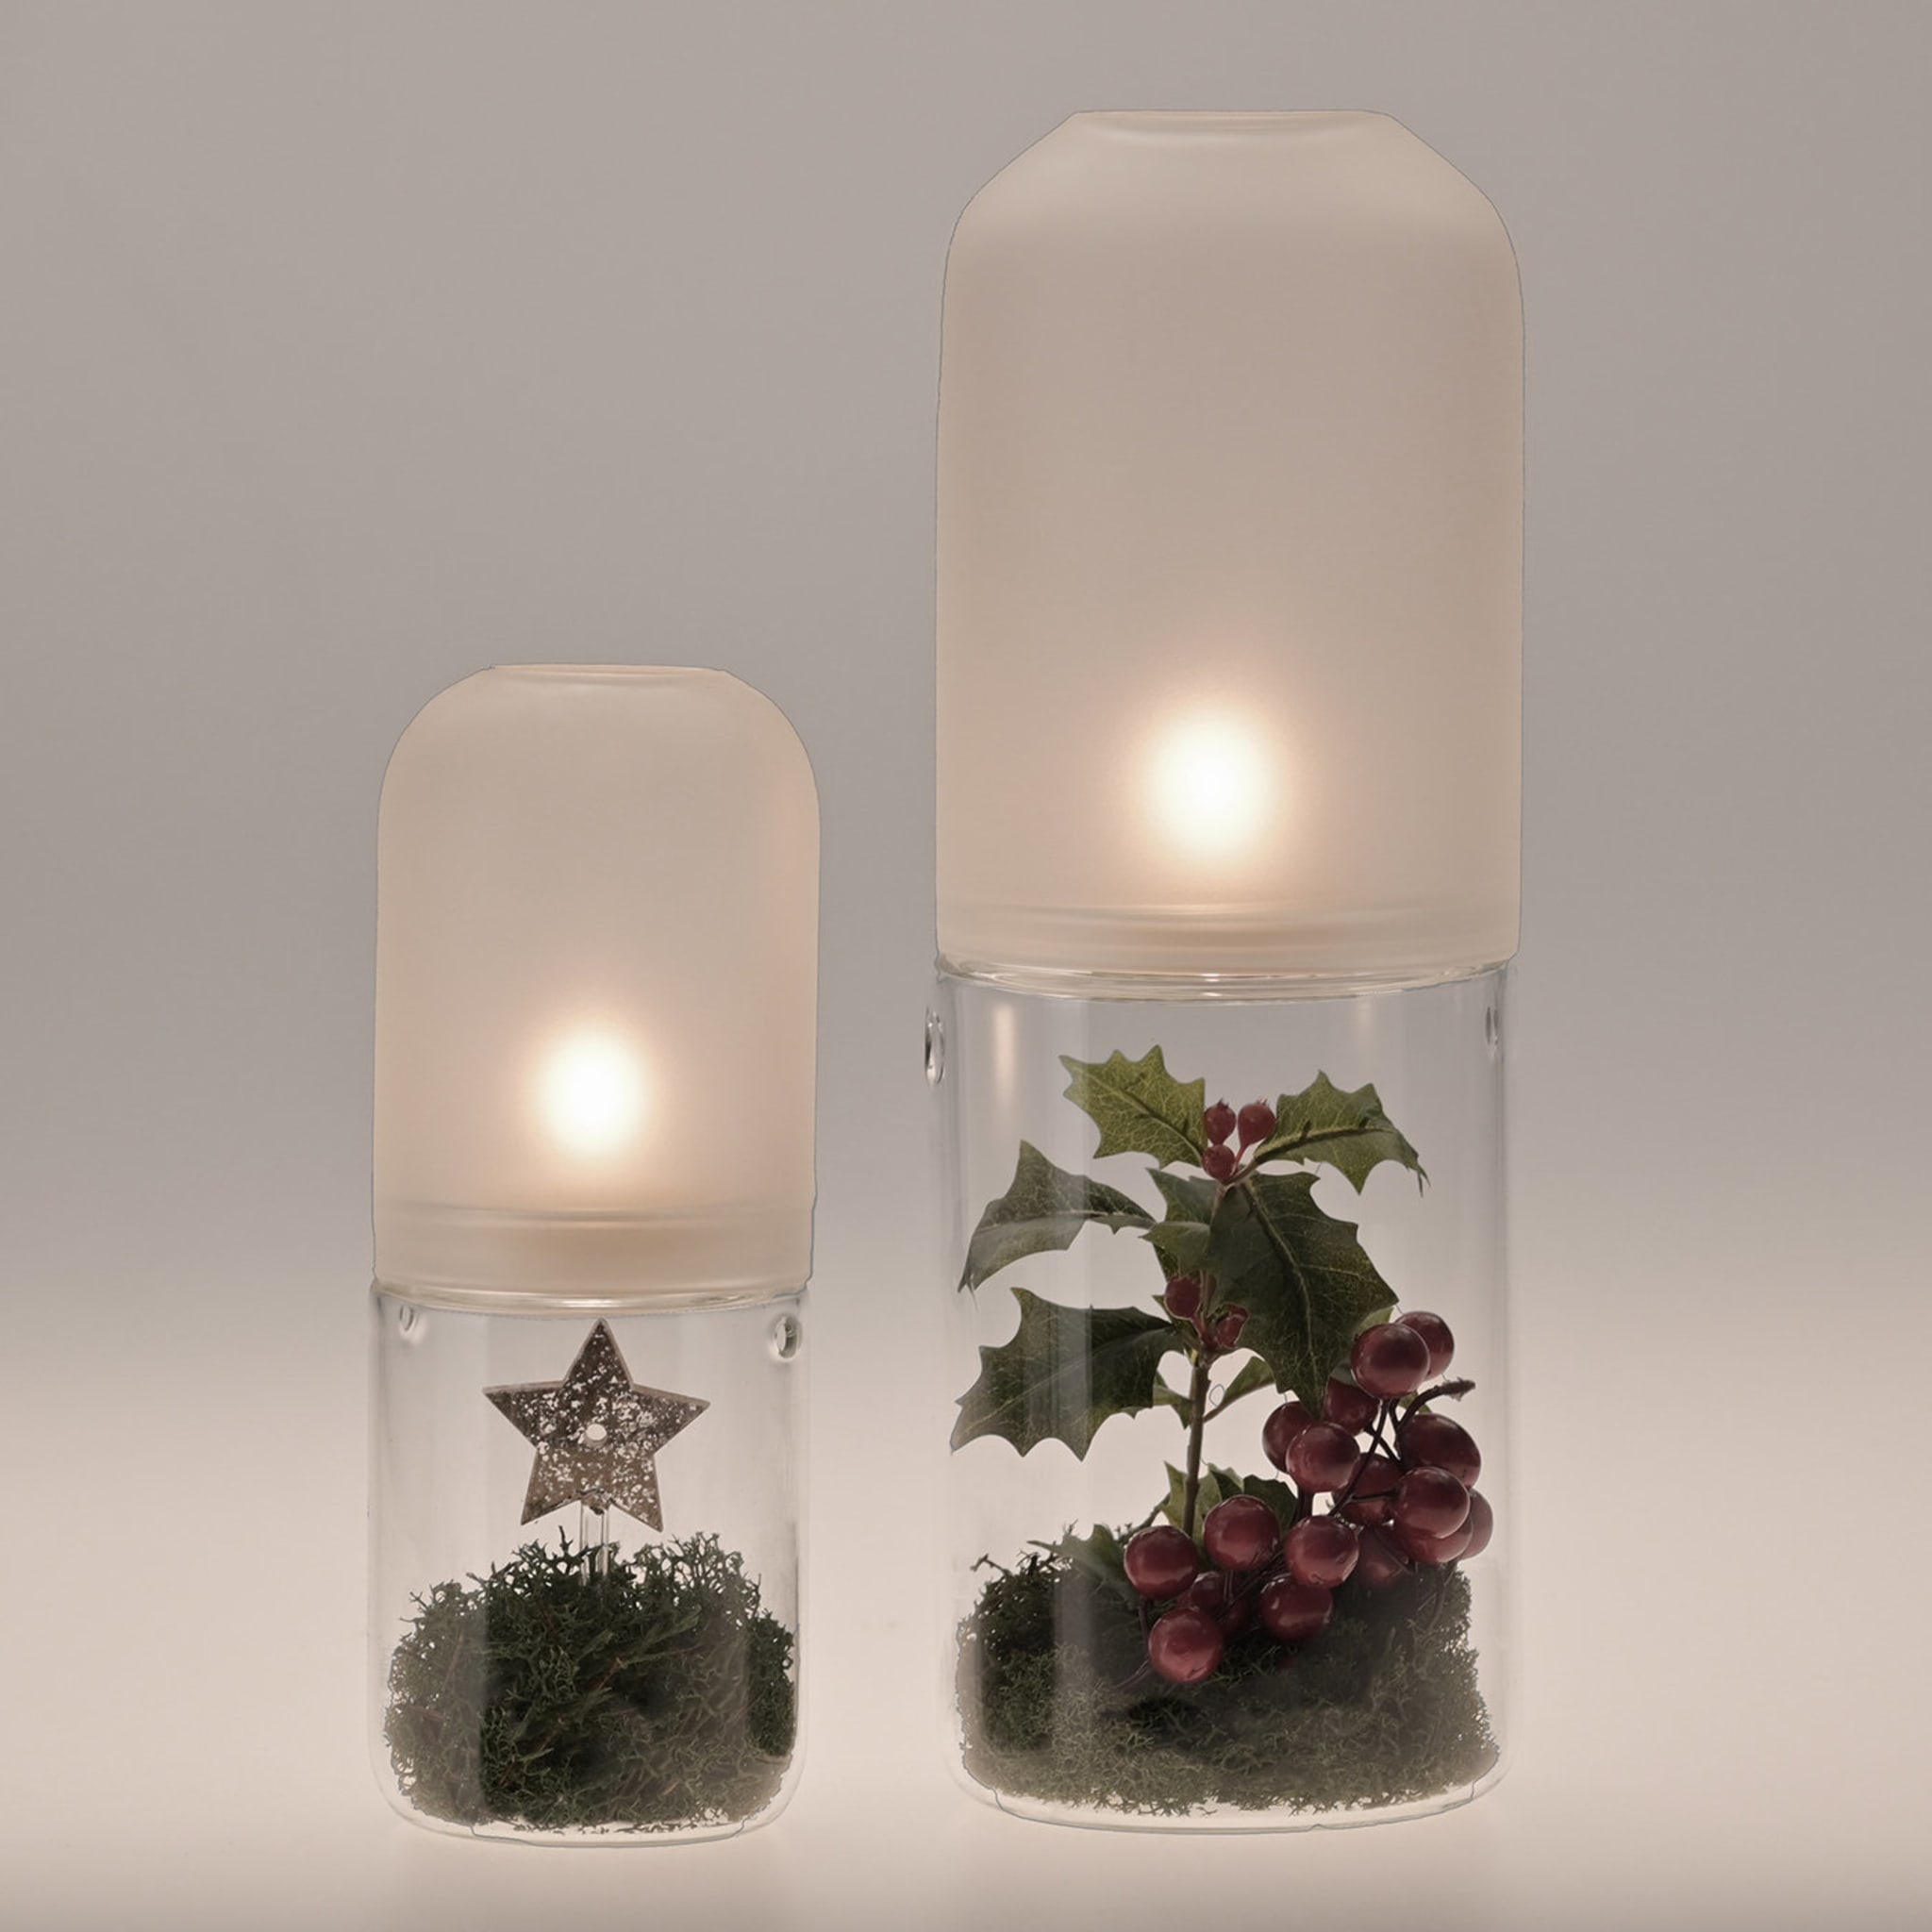 2-in-1 Candleholder - Alternative view 2